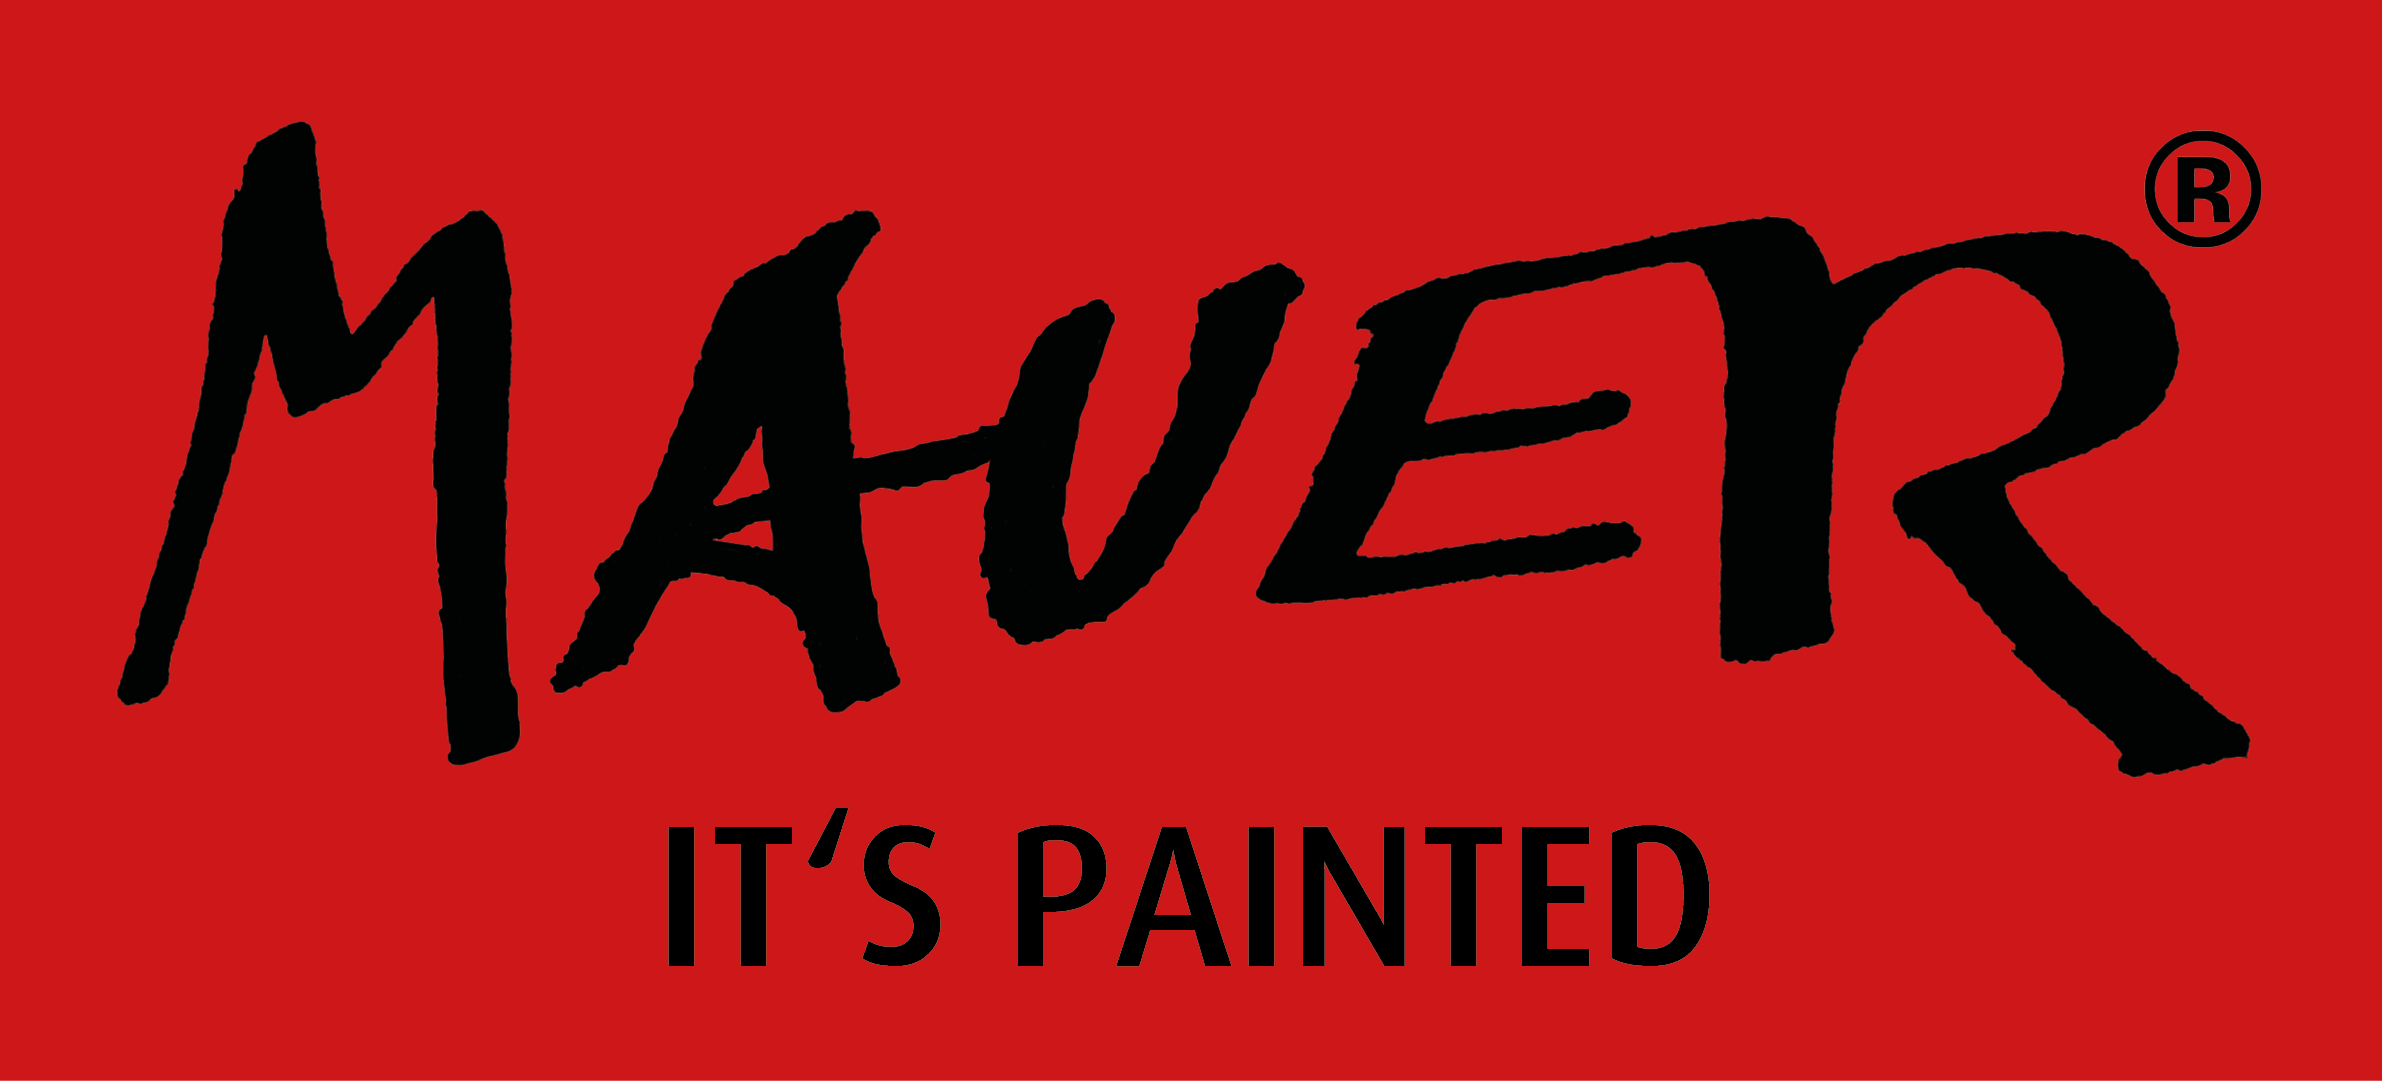 Mauer – It's painted